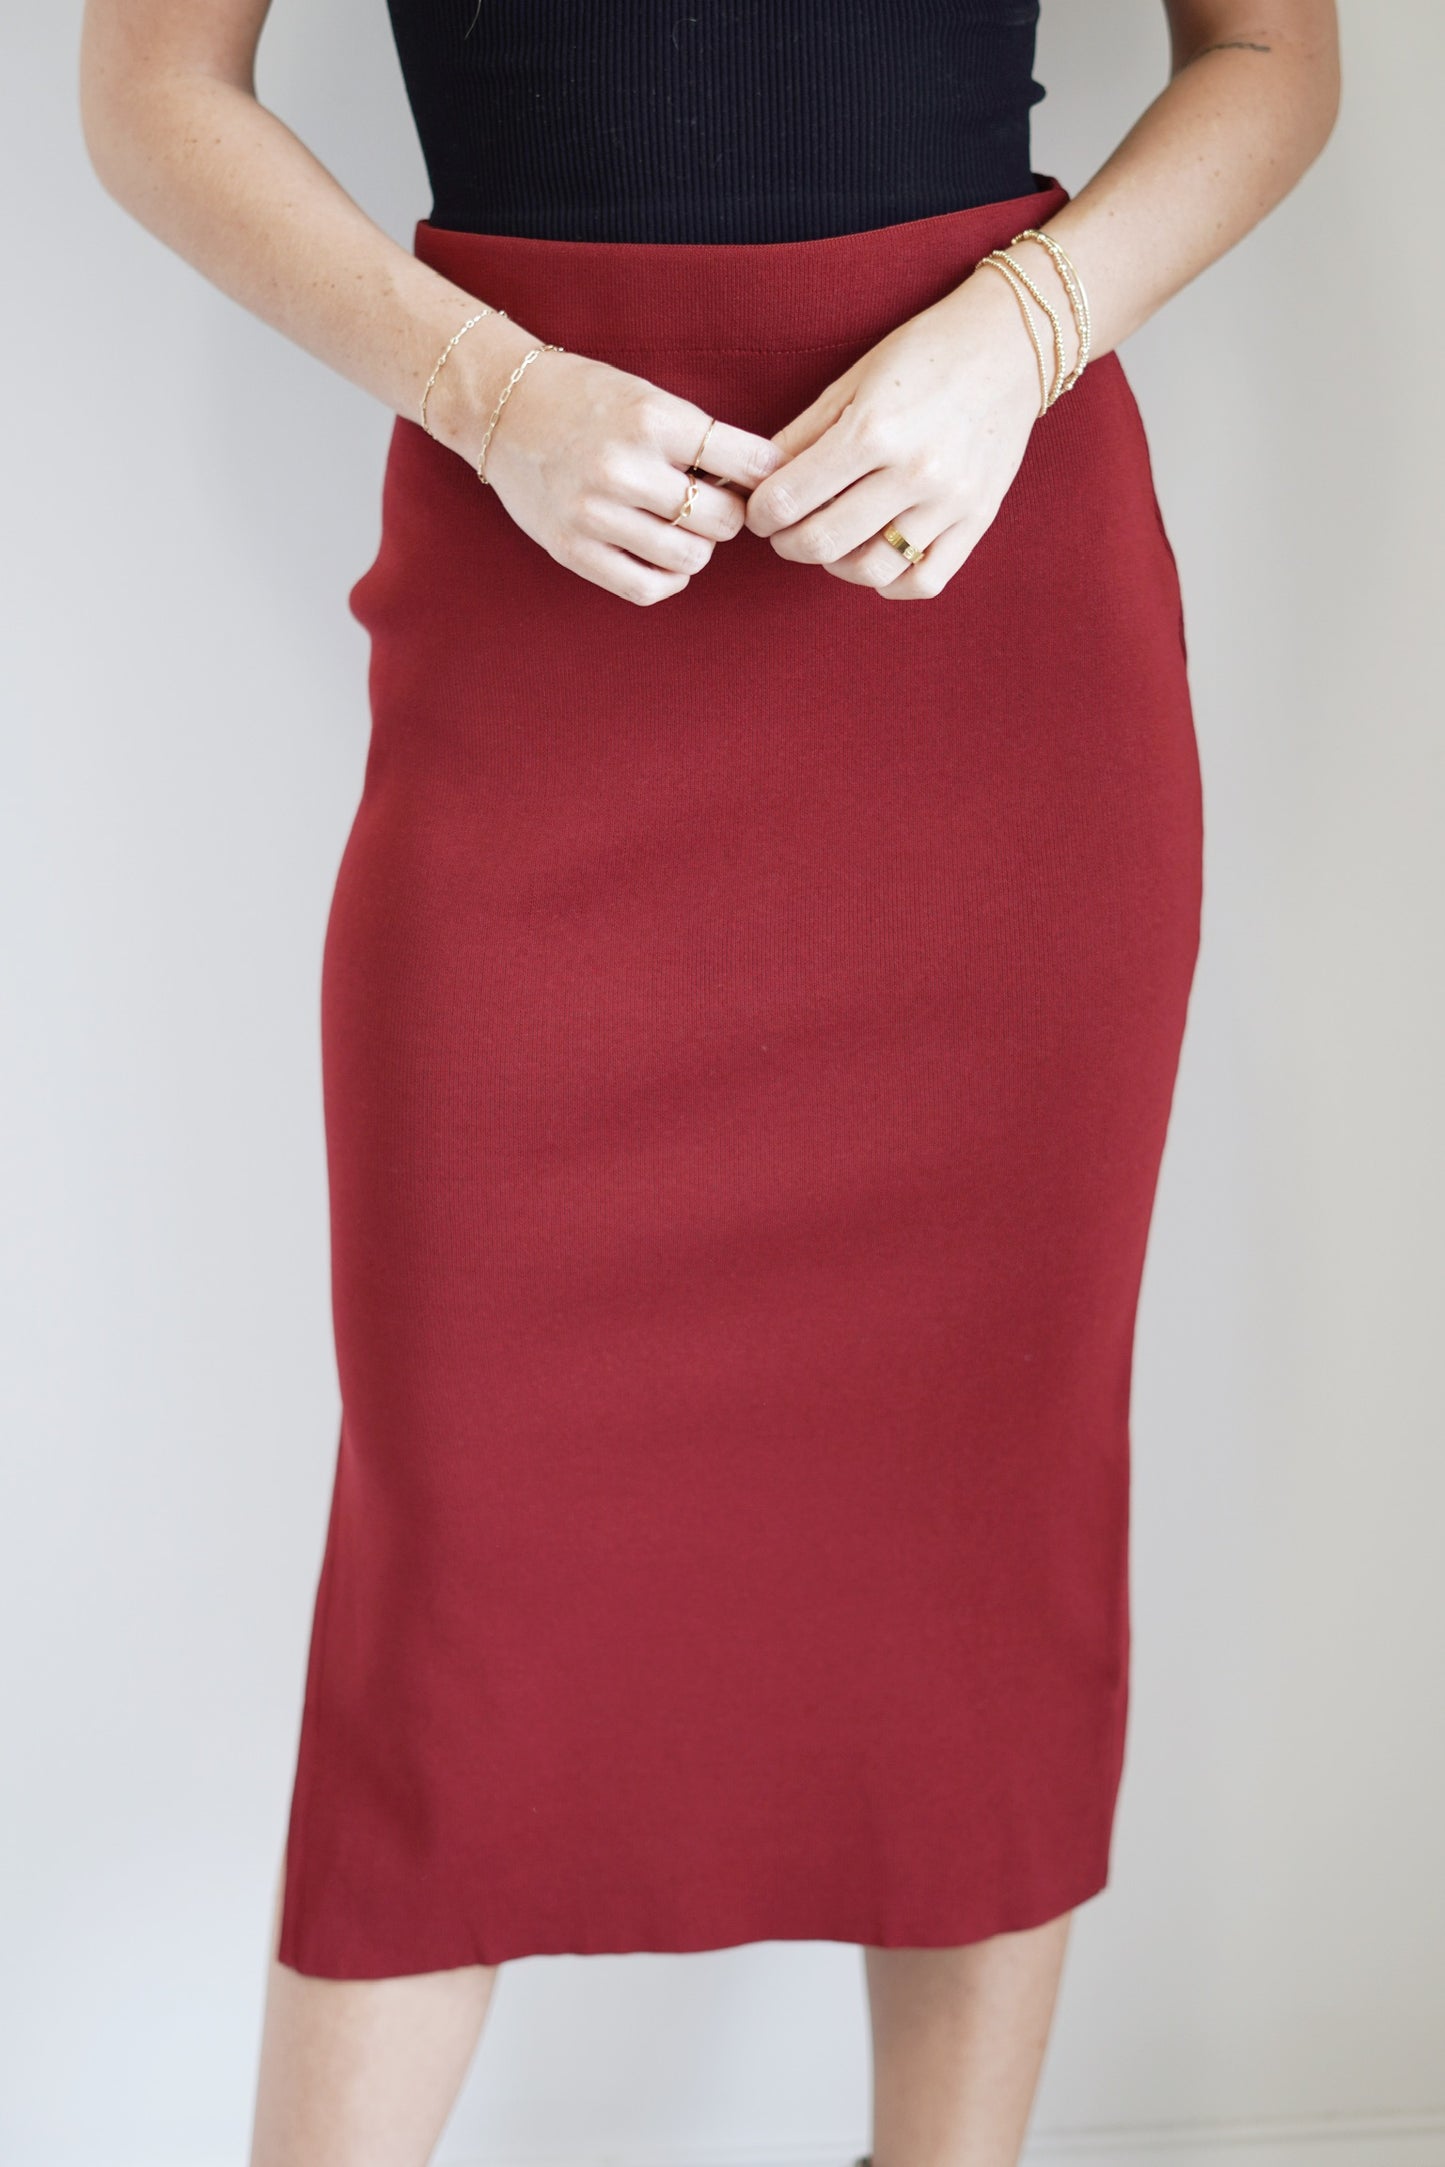 Neely Knitted Midi Skirt Elastic Waistband Fitted Side Slits Carmine Red Color Midi Length 60% Polyester, 40% Viscose Care: Hand wash cold water separately, Do not bleach, Reshape and dry flat, Low iron if needed